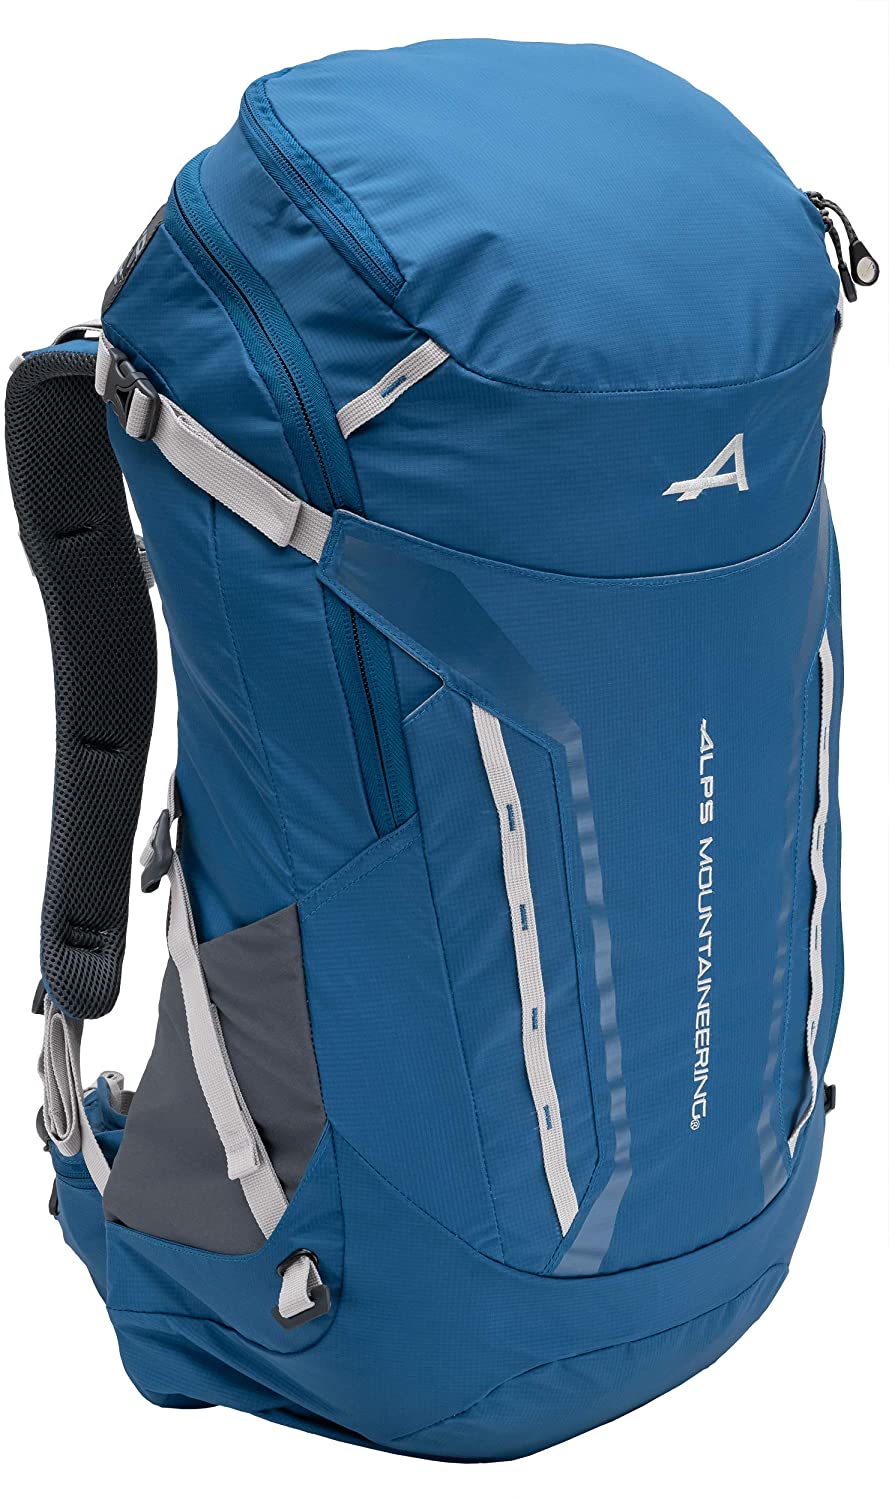 ALPS Mountaineering Baja Day Backpack 40L, Blue/Gray - AL6542041